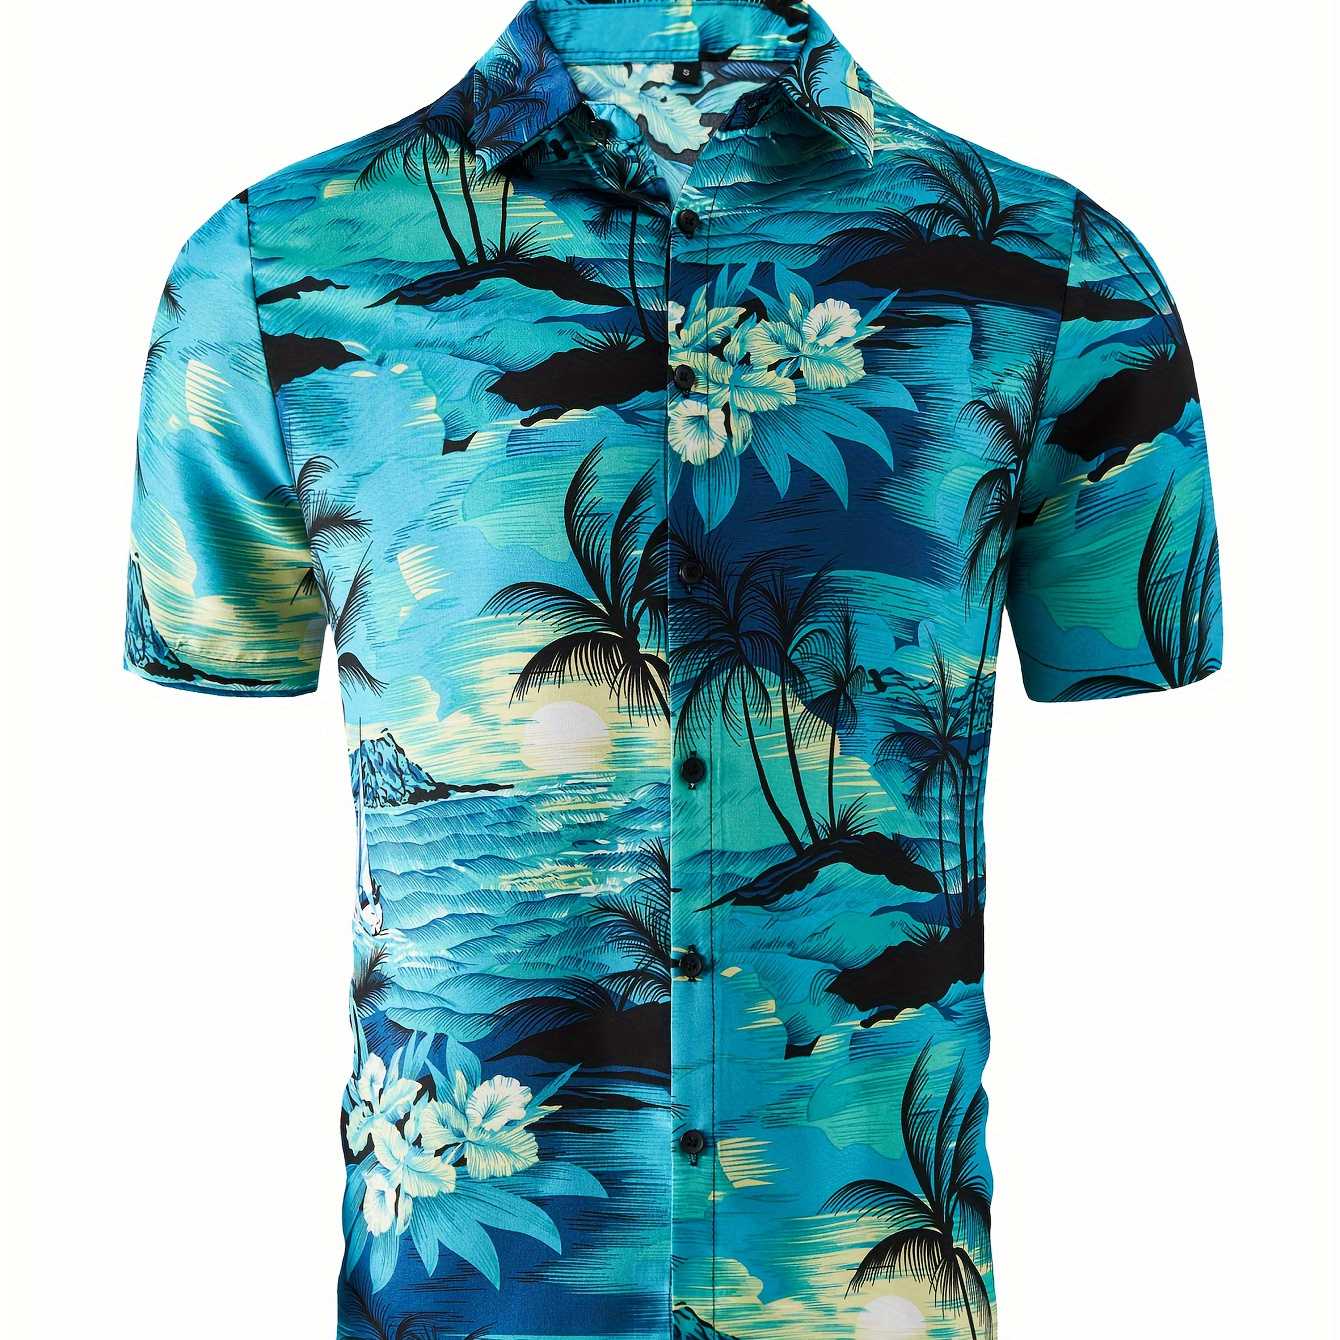 

Hawaiian Trees And Flowers Pattern Men's Short Sleeve Button Down Shirt, Summer Beach Leisure And Vacation